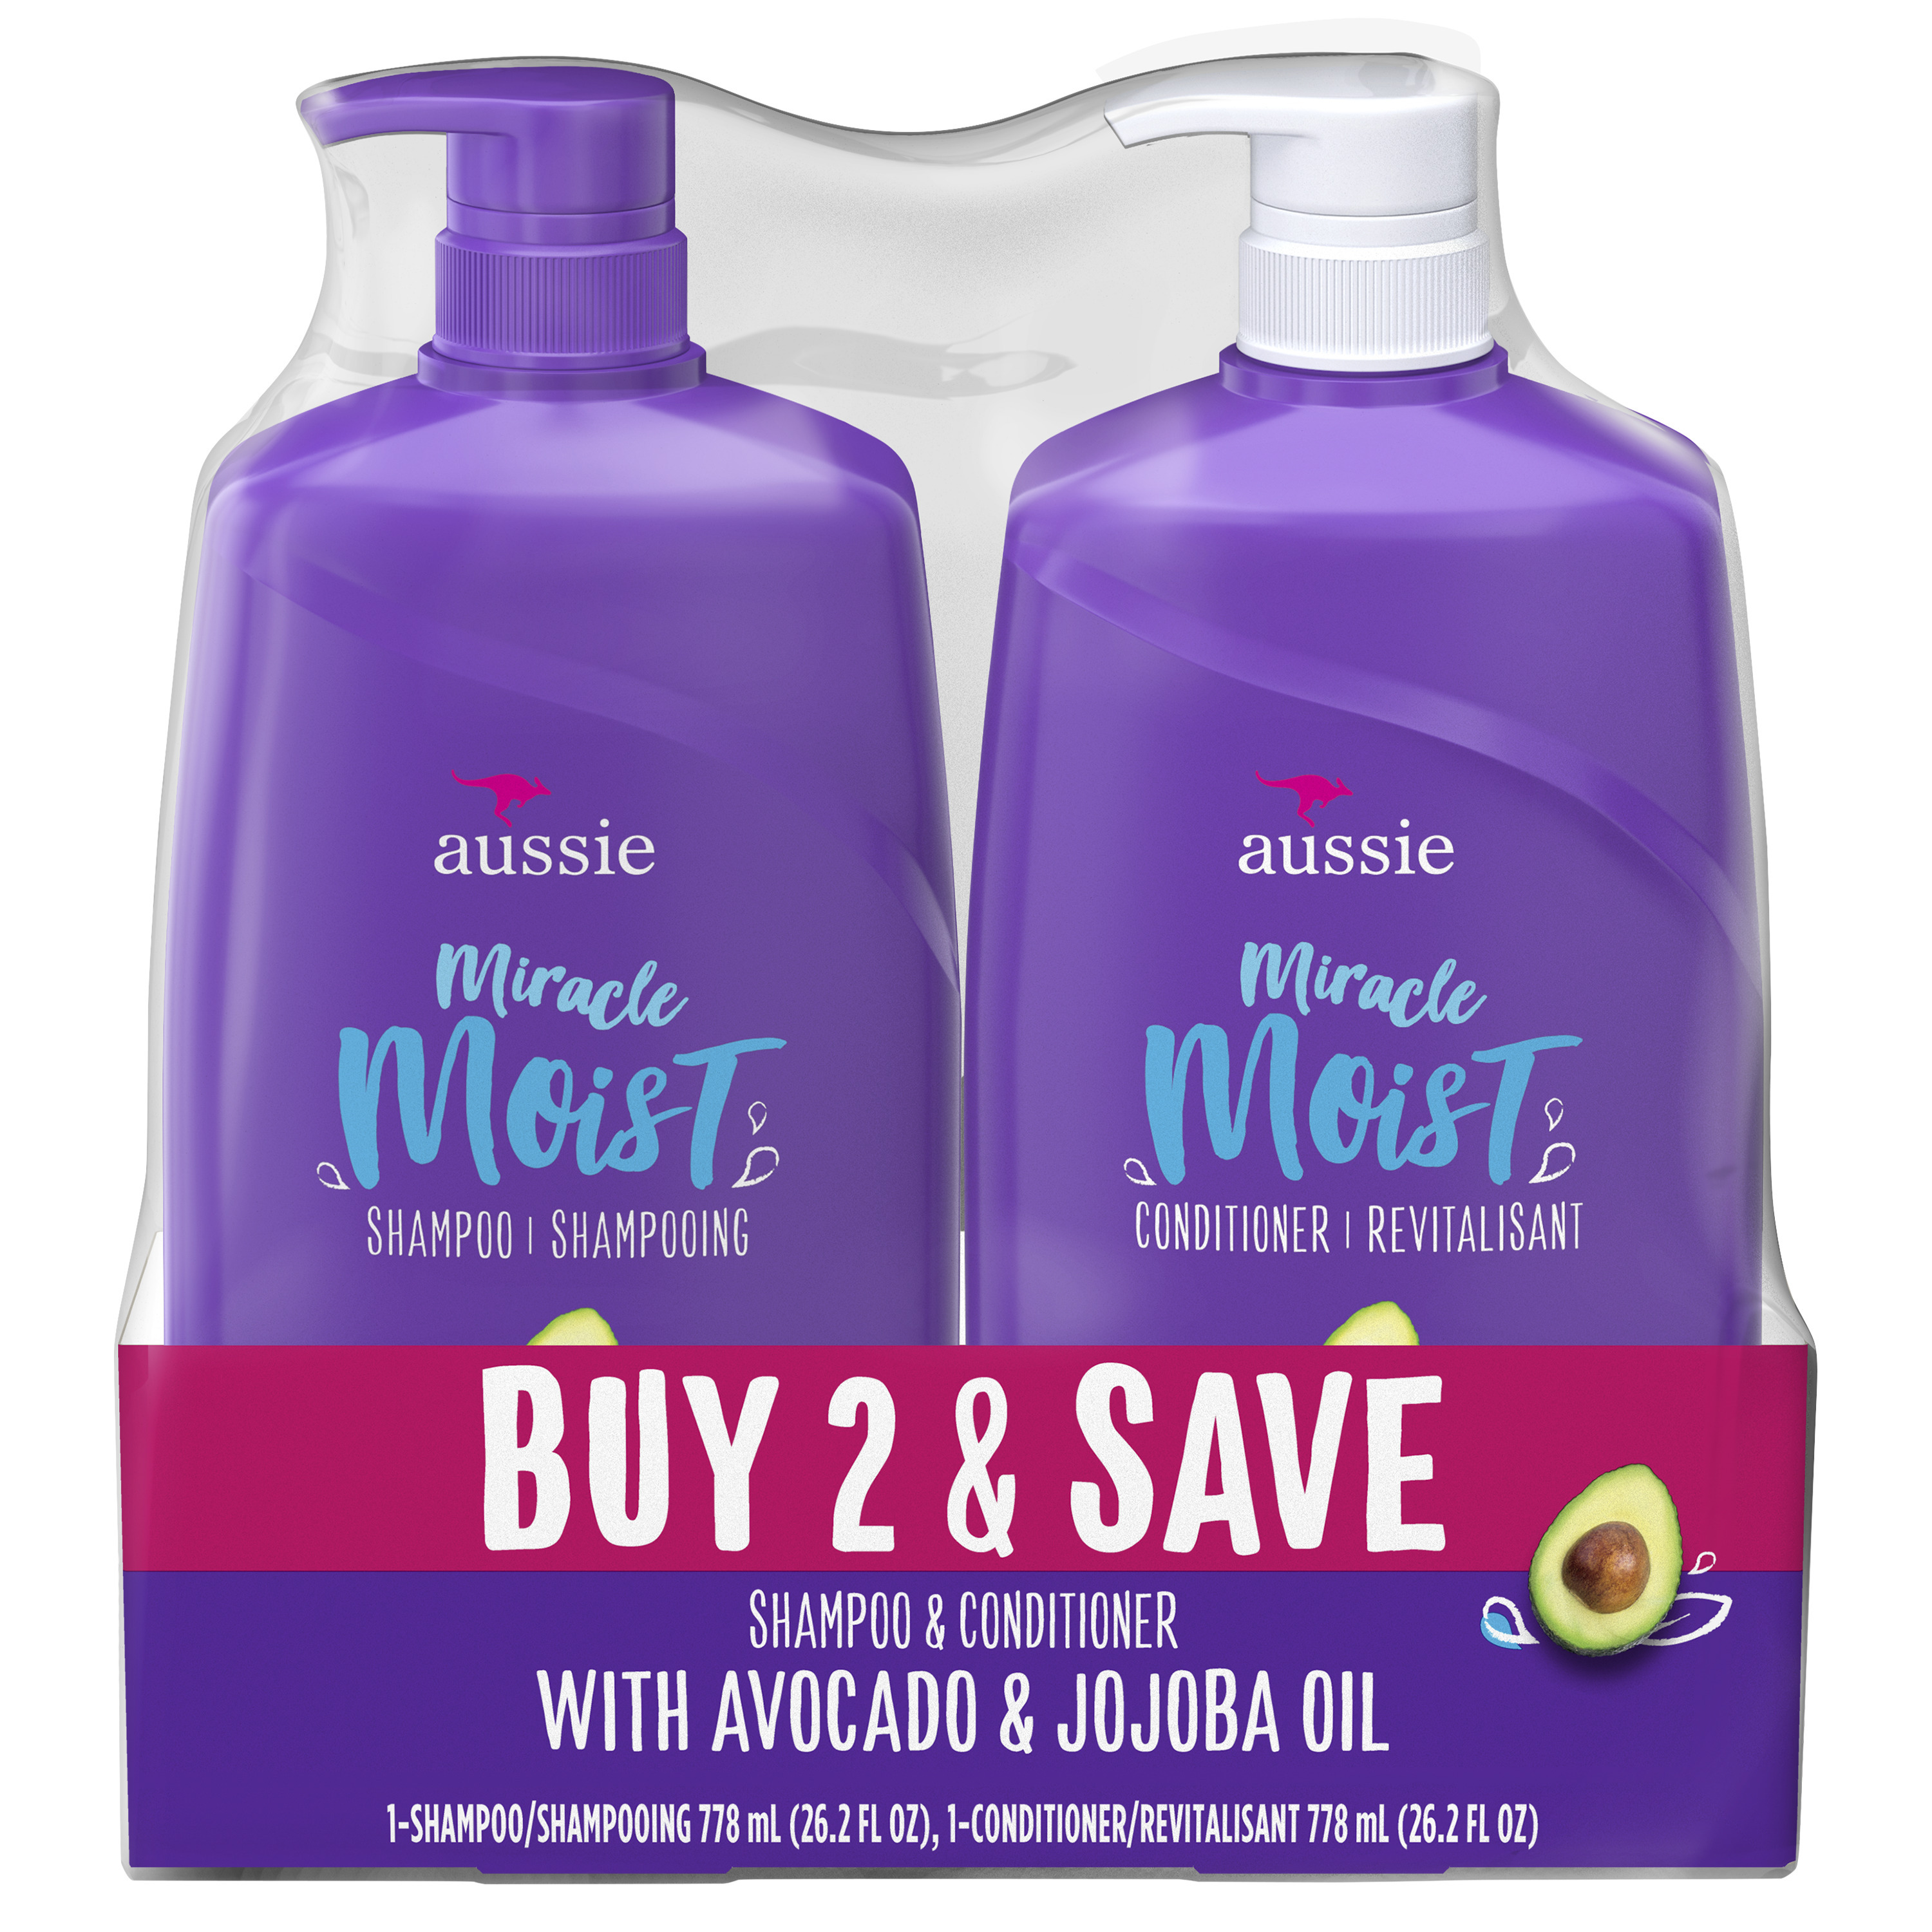 Aussie Miracle Moist Shampoo and Conditioner Hair Set, 26.2 fl oz - image 3 of 9